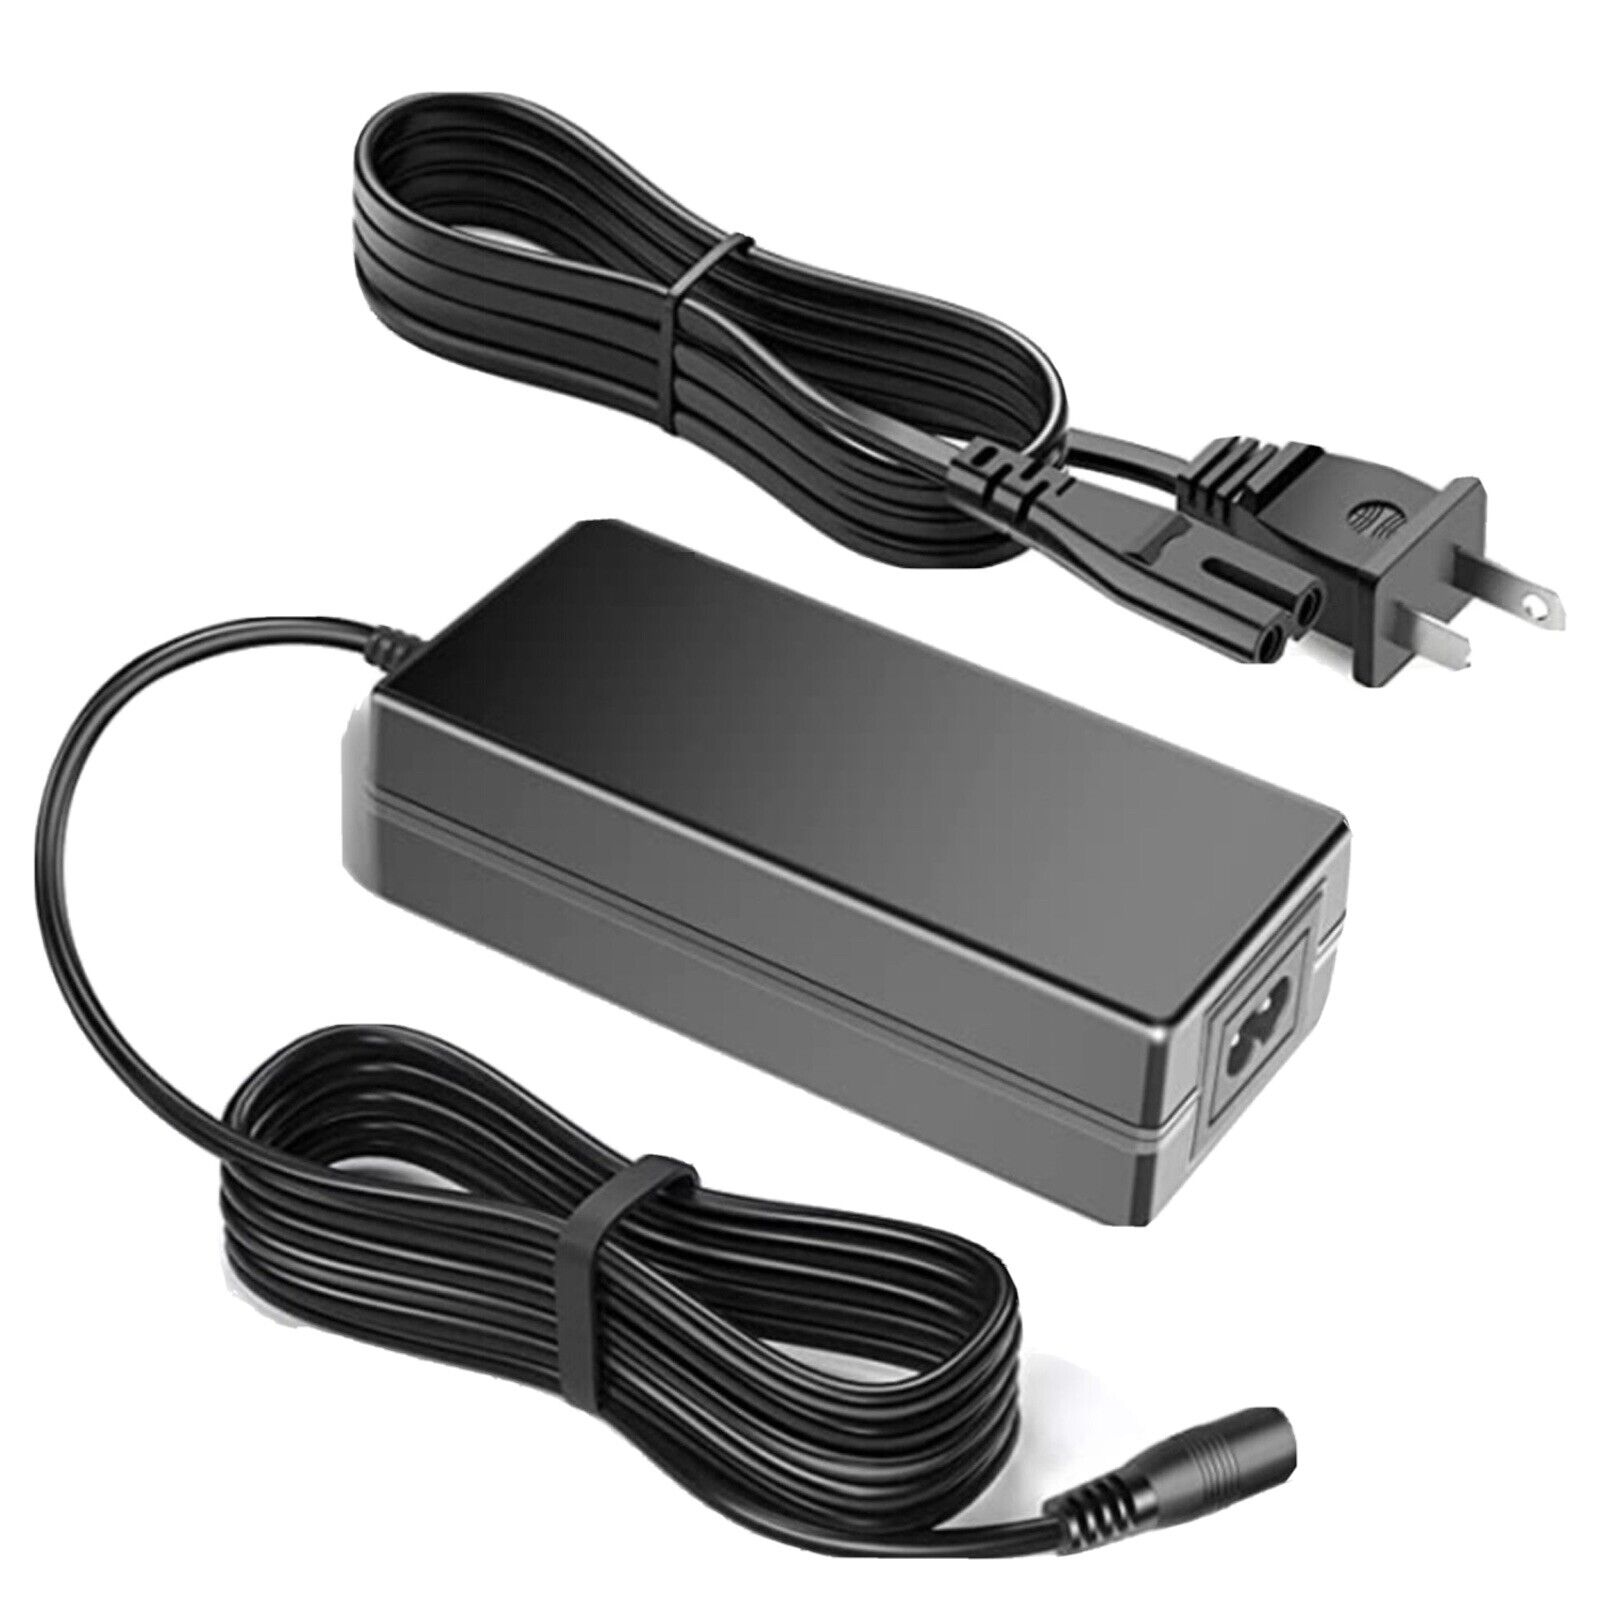 Genuine Sony Laptop Charger AC Adapter Power Supply PCGA-AC19V4 19.5V 5.13A 100W